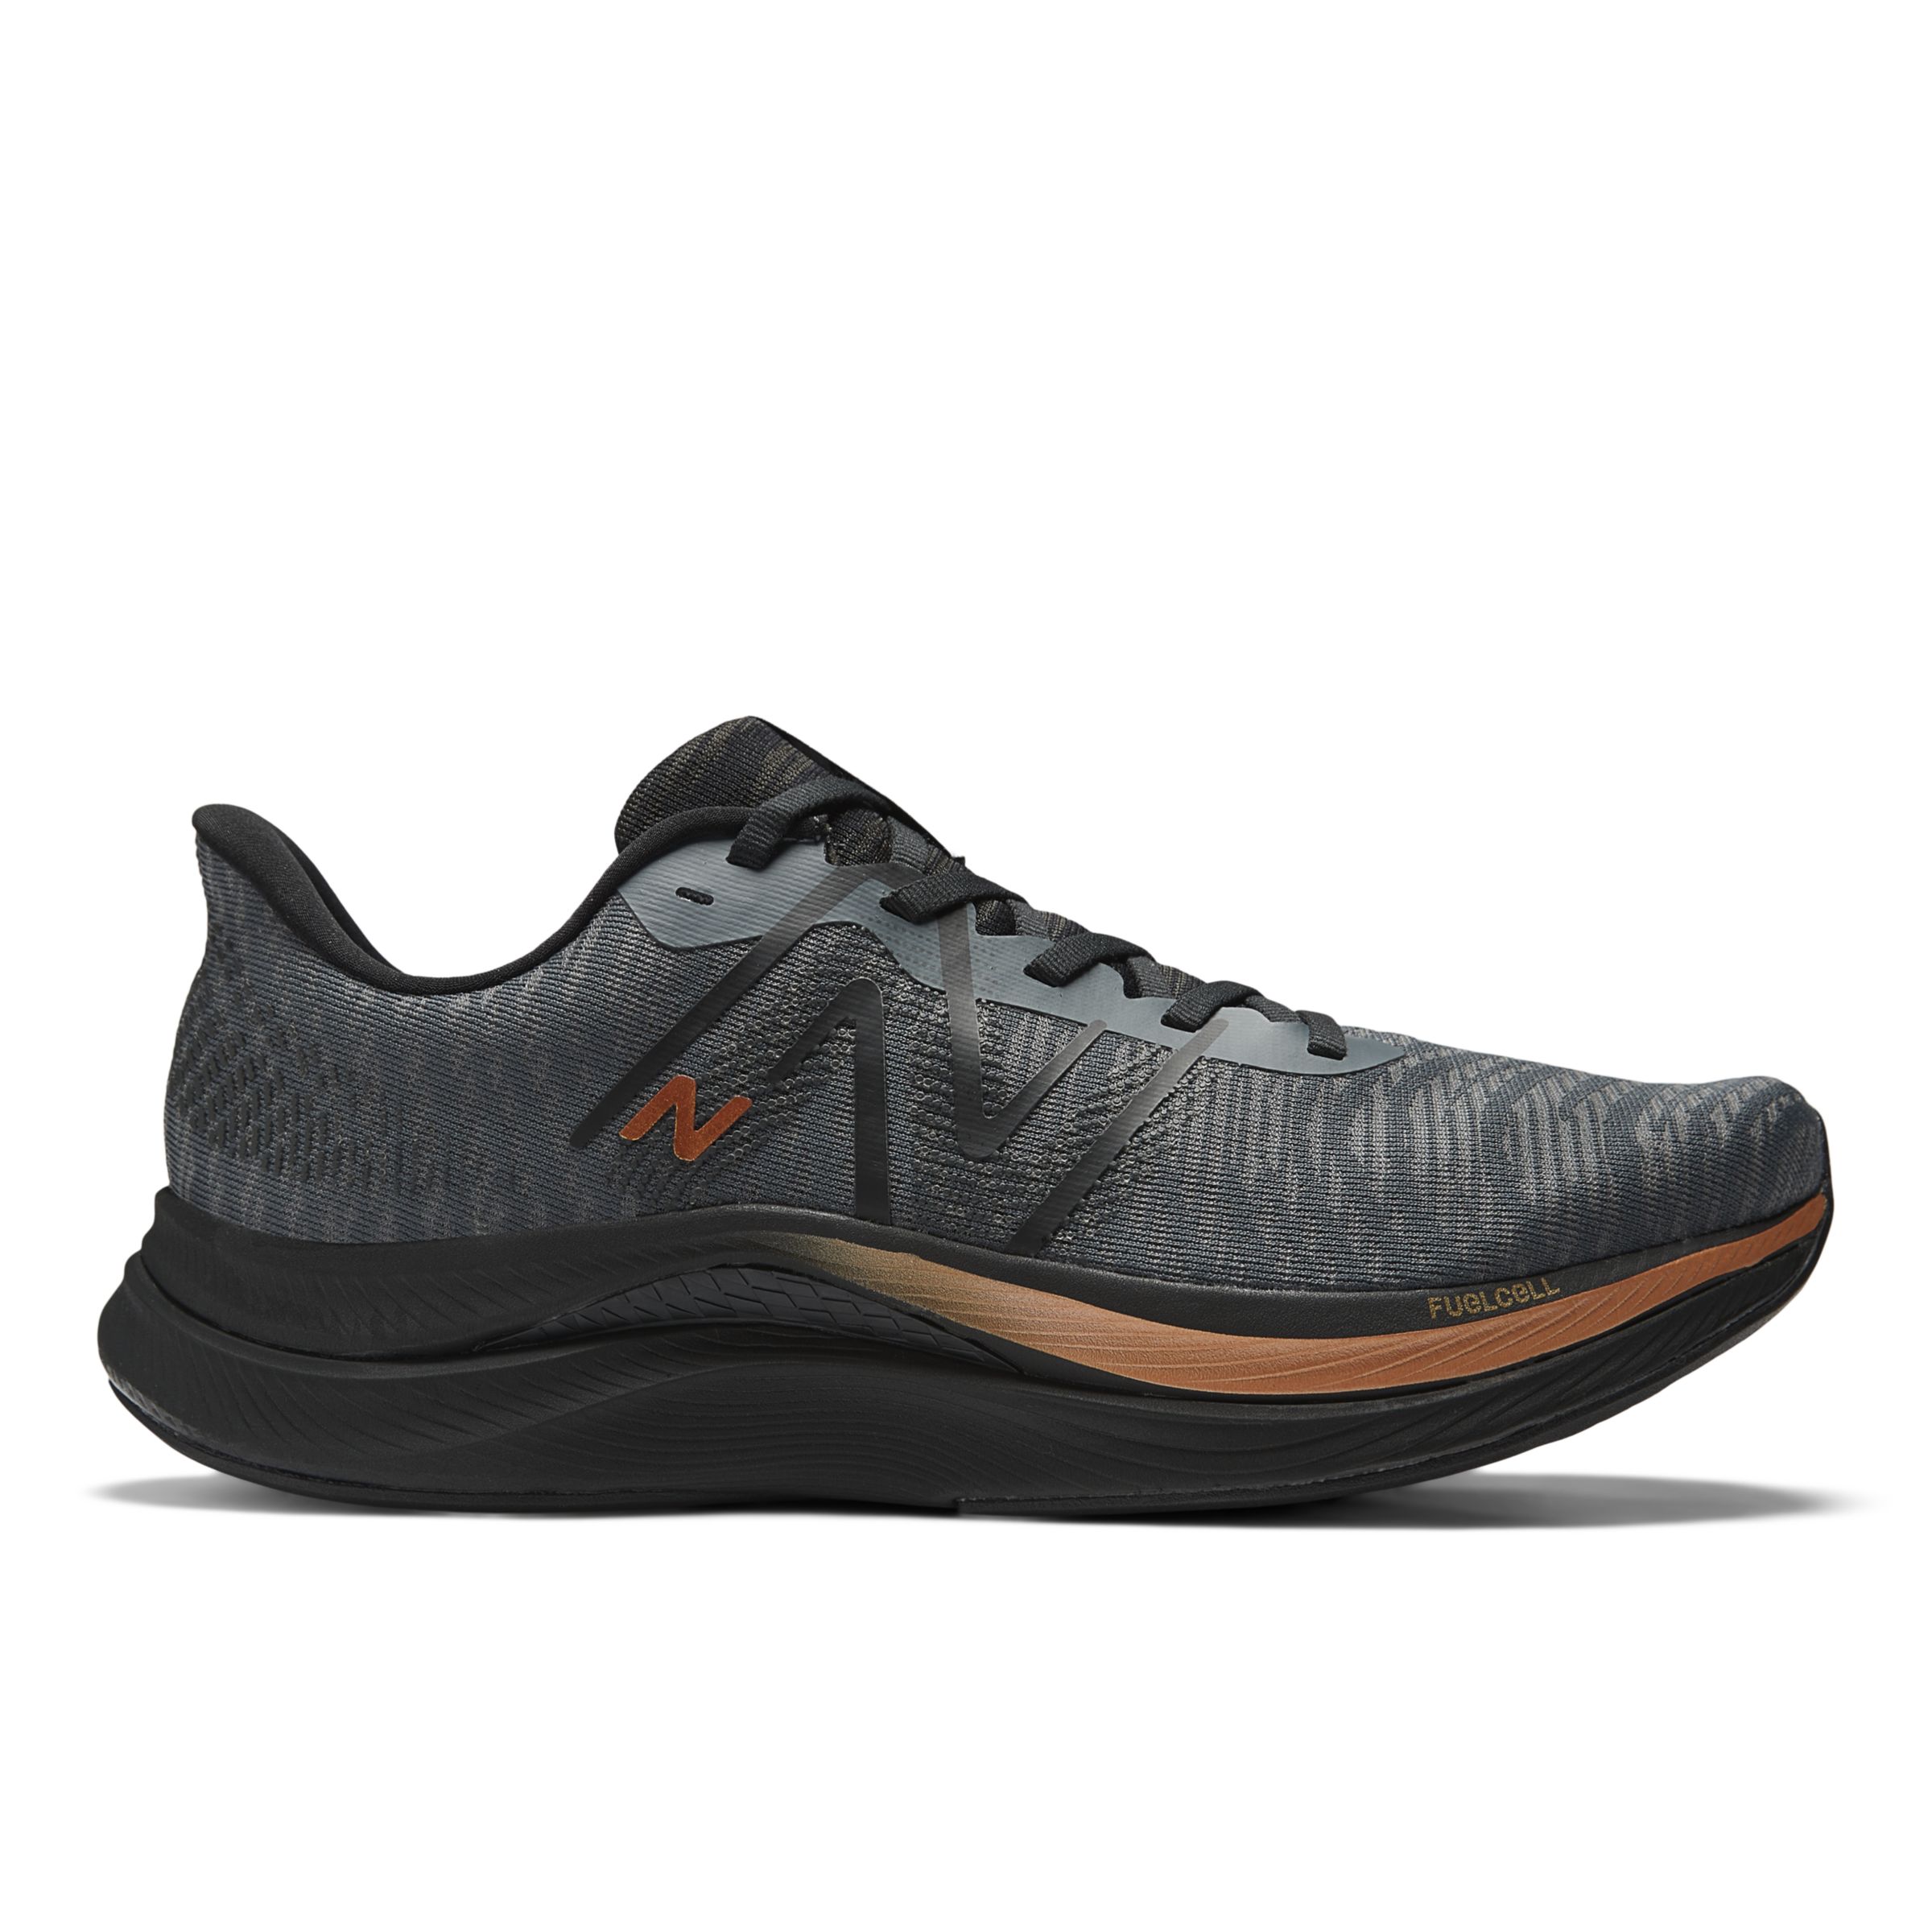 Men's FuelCell Propel v4 Shoes - New Balance